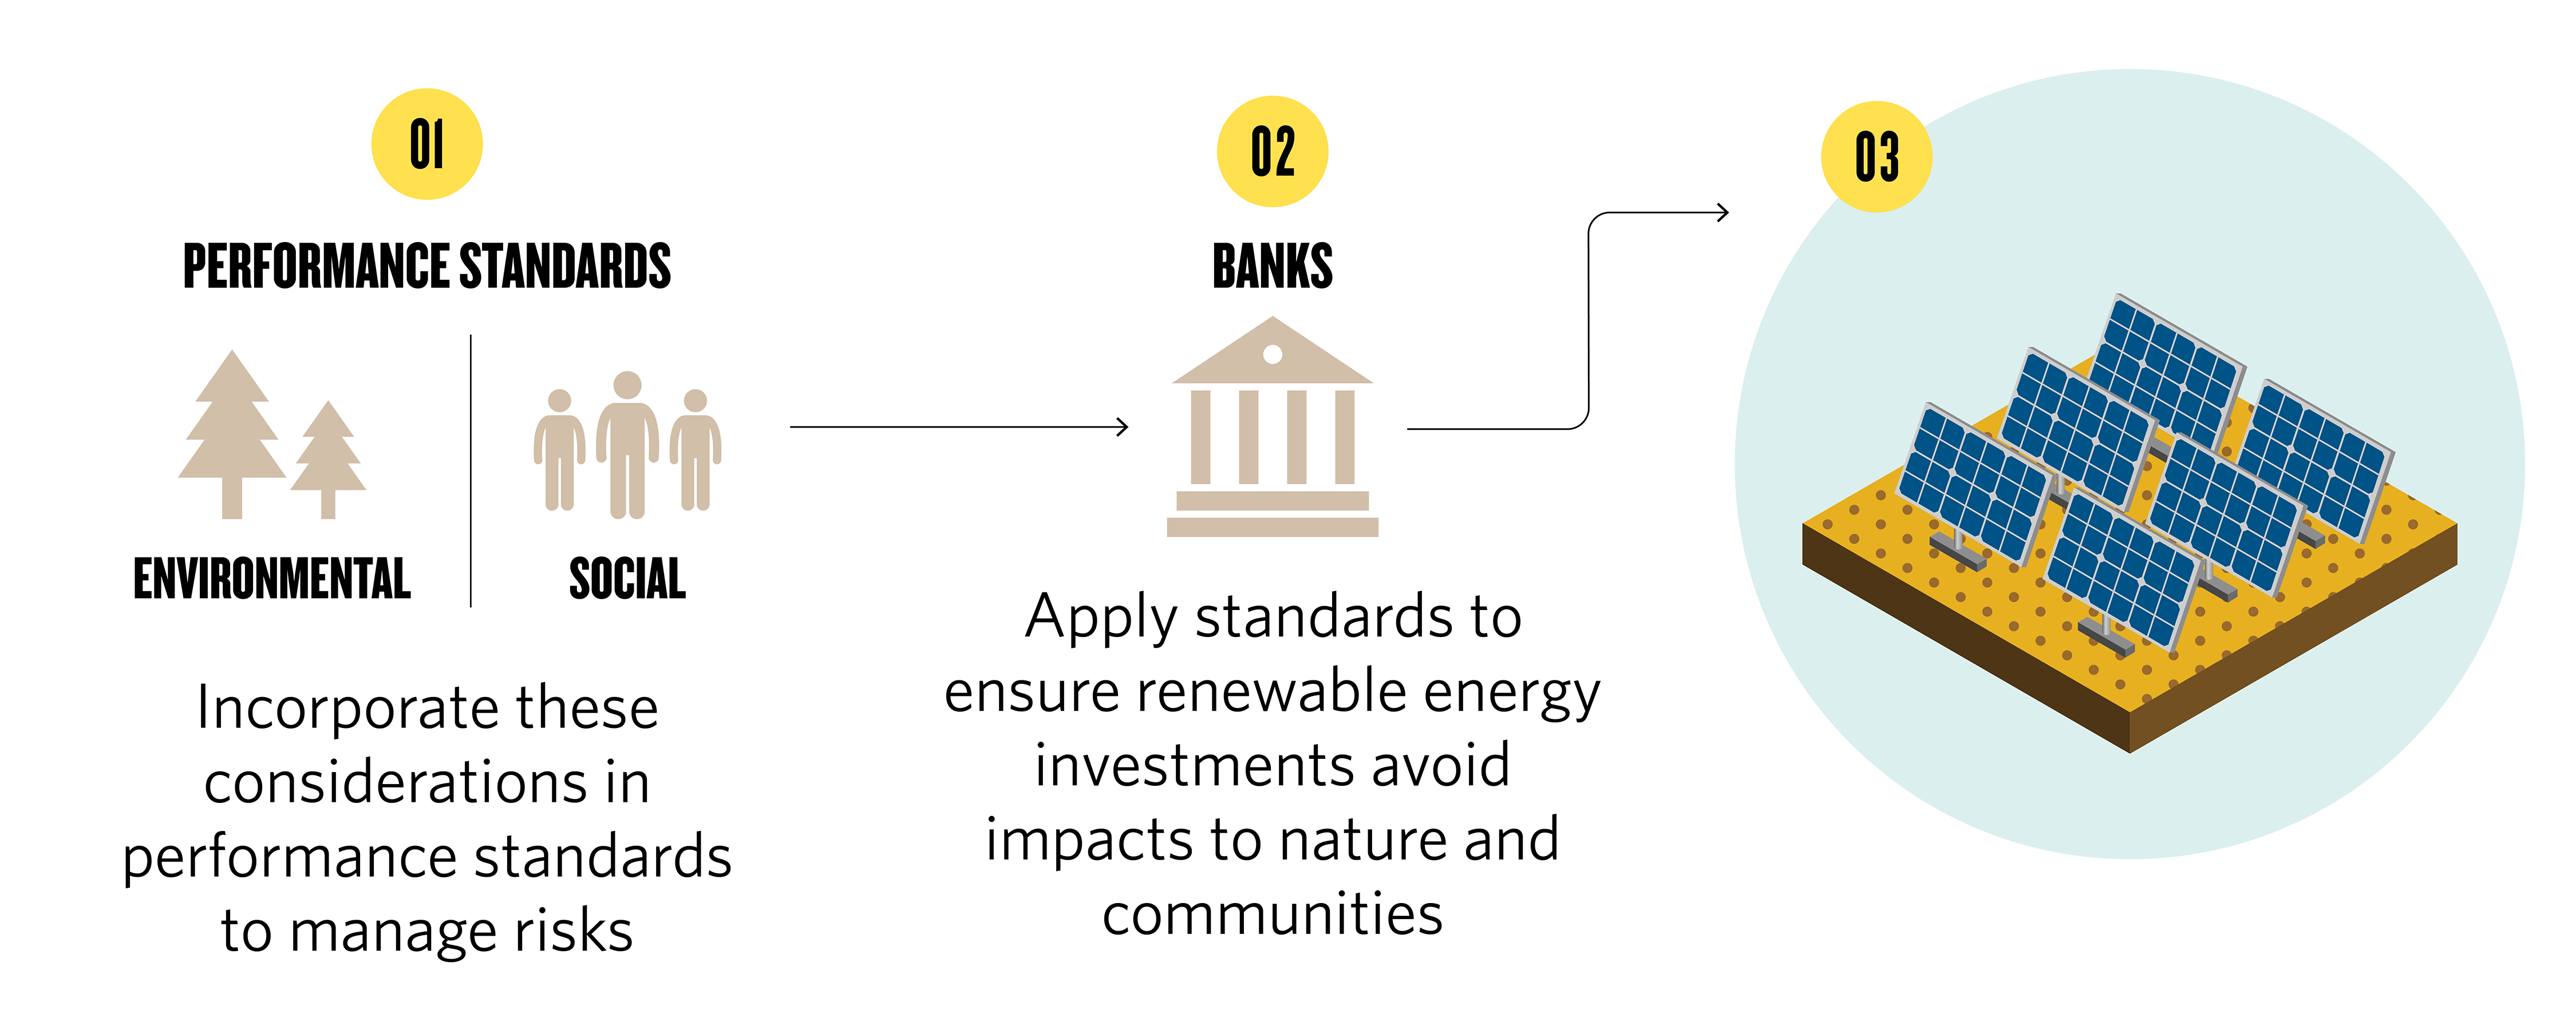 a flowchart depicting performance standards that include environmental and social considerations being applied to financial institutions' investment in renewable energy projects, avoiding negative impacts to nature and communities